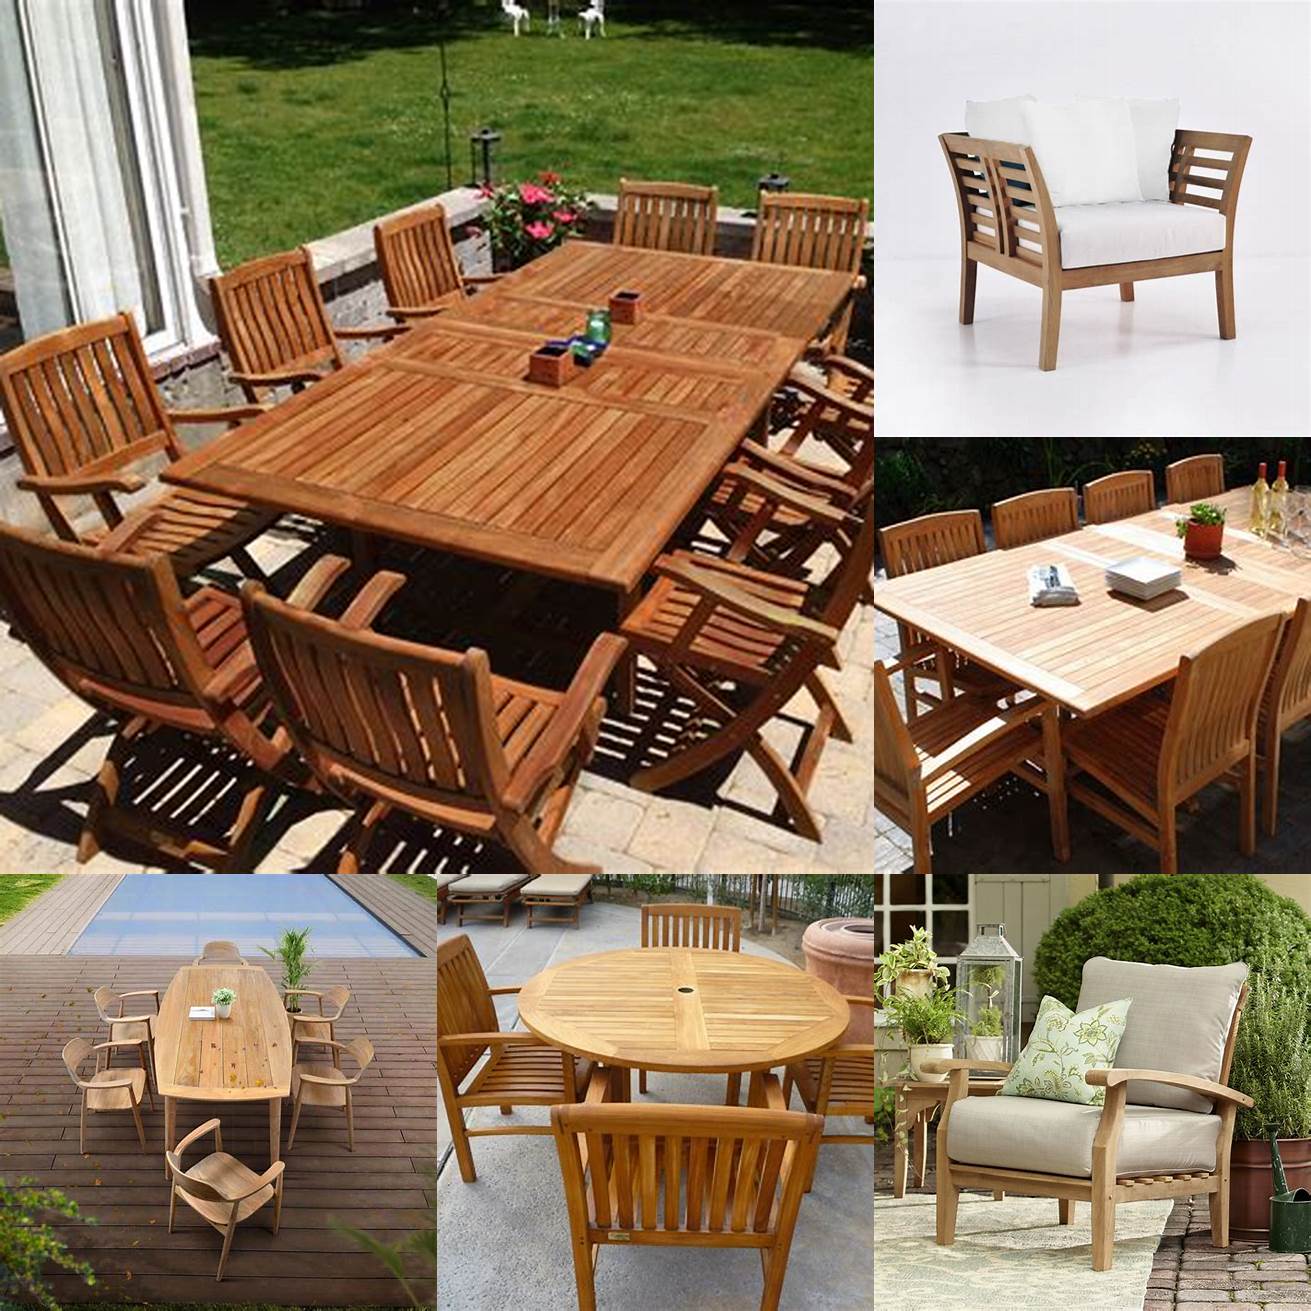 A picture of plantation teak furniture being used in an outdoor setting